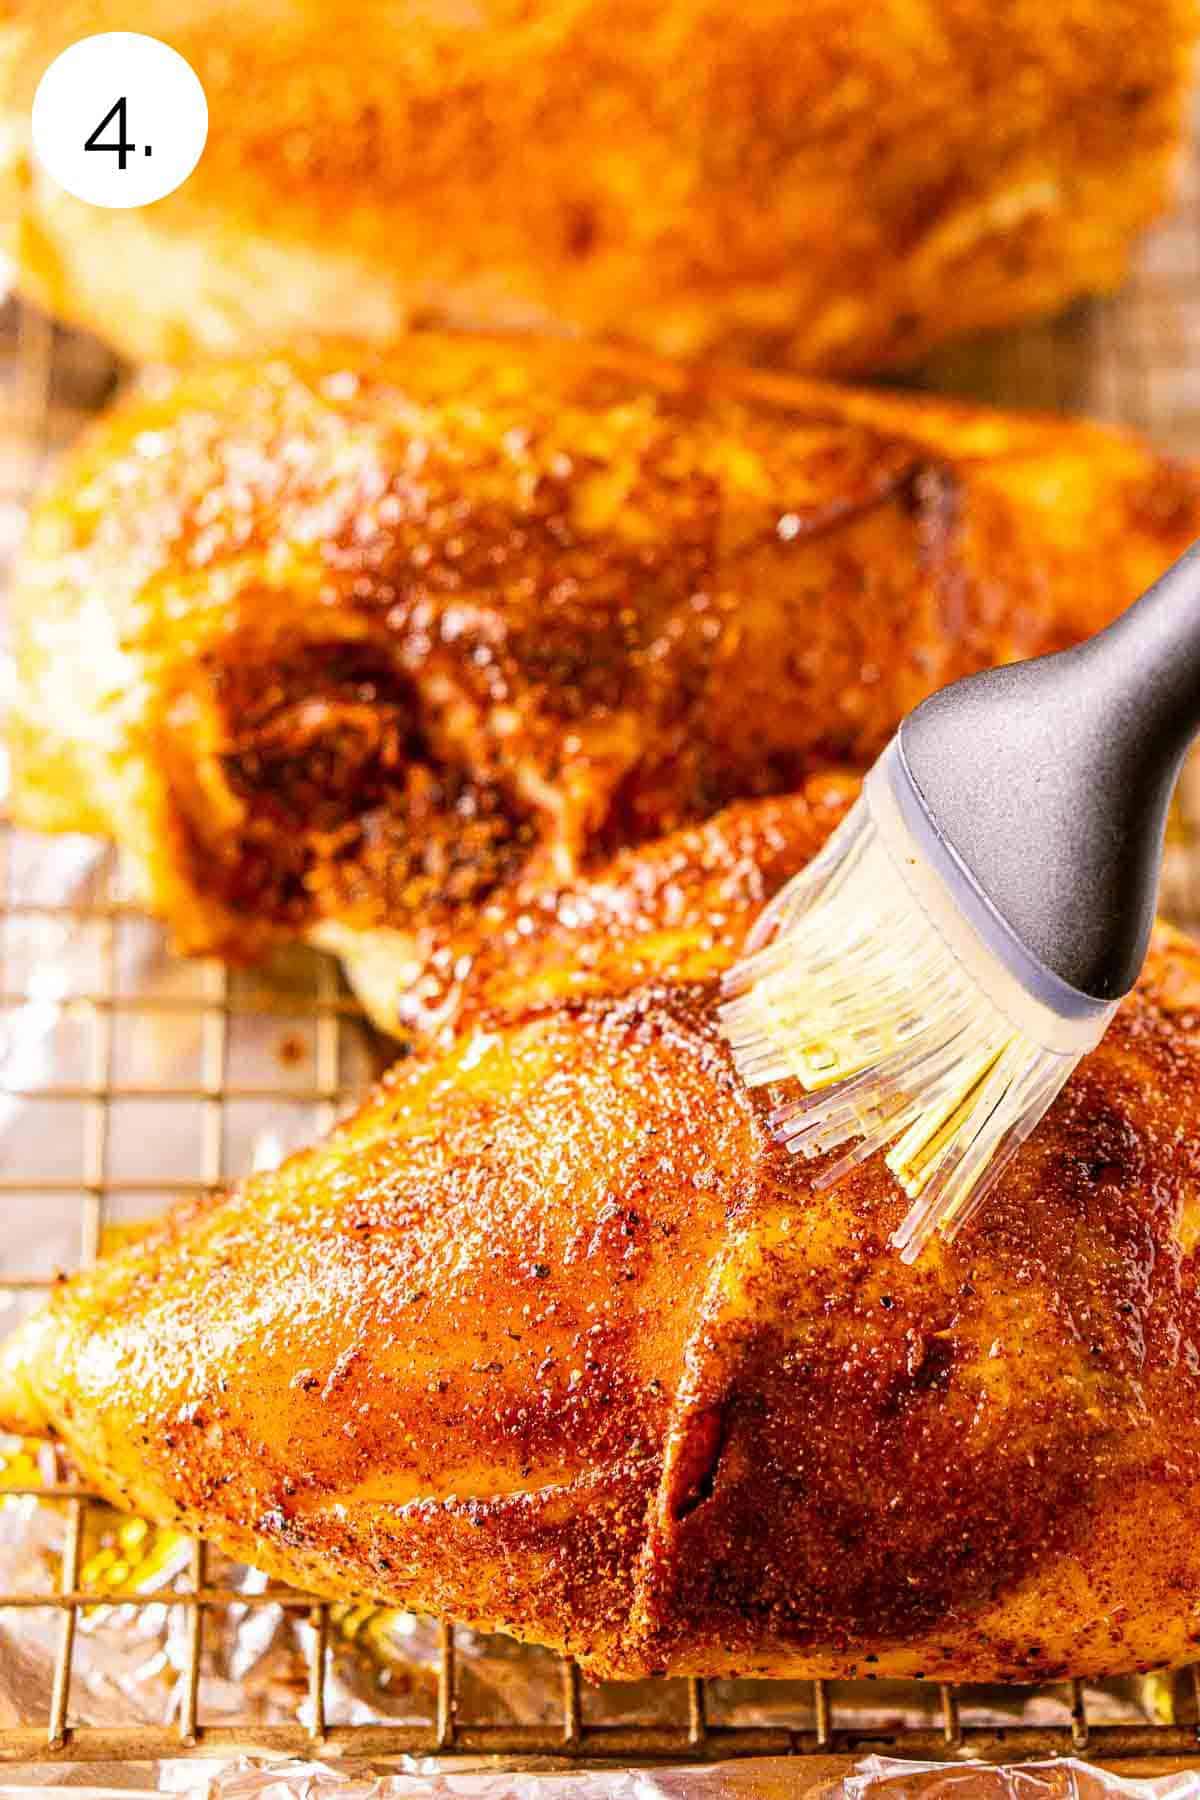 A silicone brush coating the chicken skin with a layer of oil to help crisp the skin in the next phase of smoking.